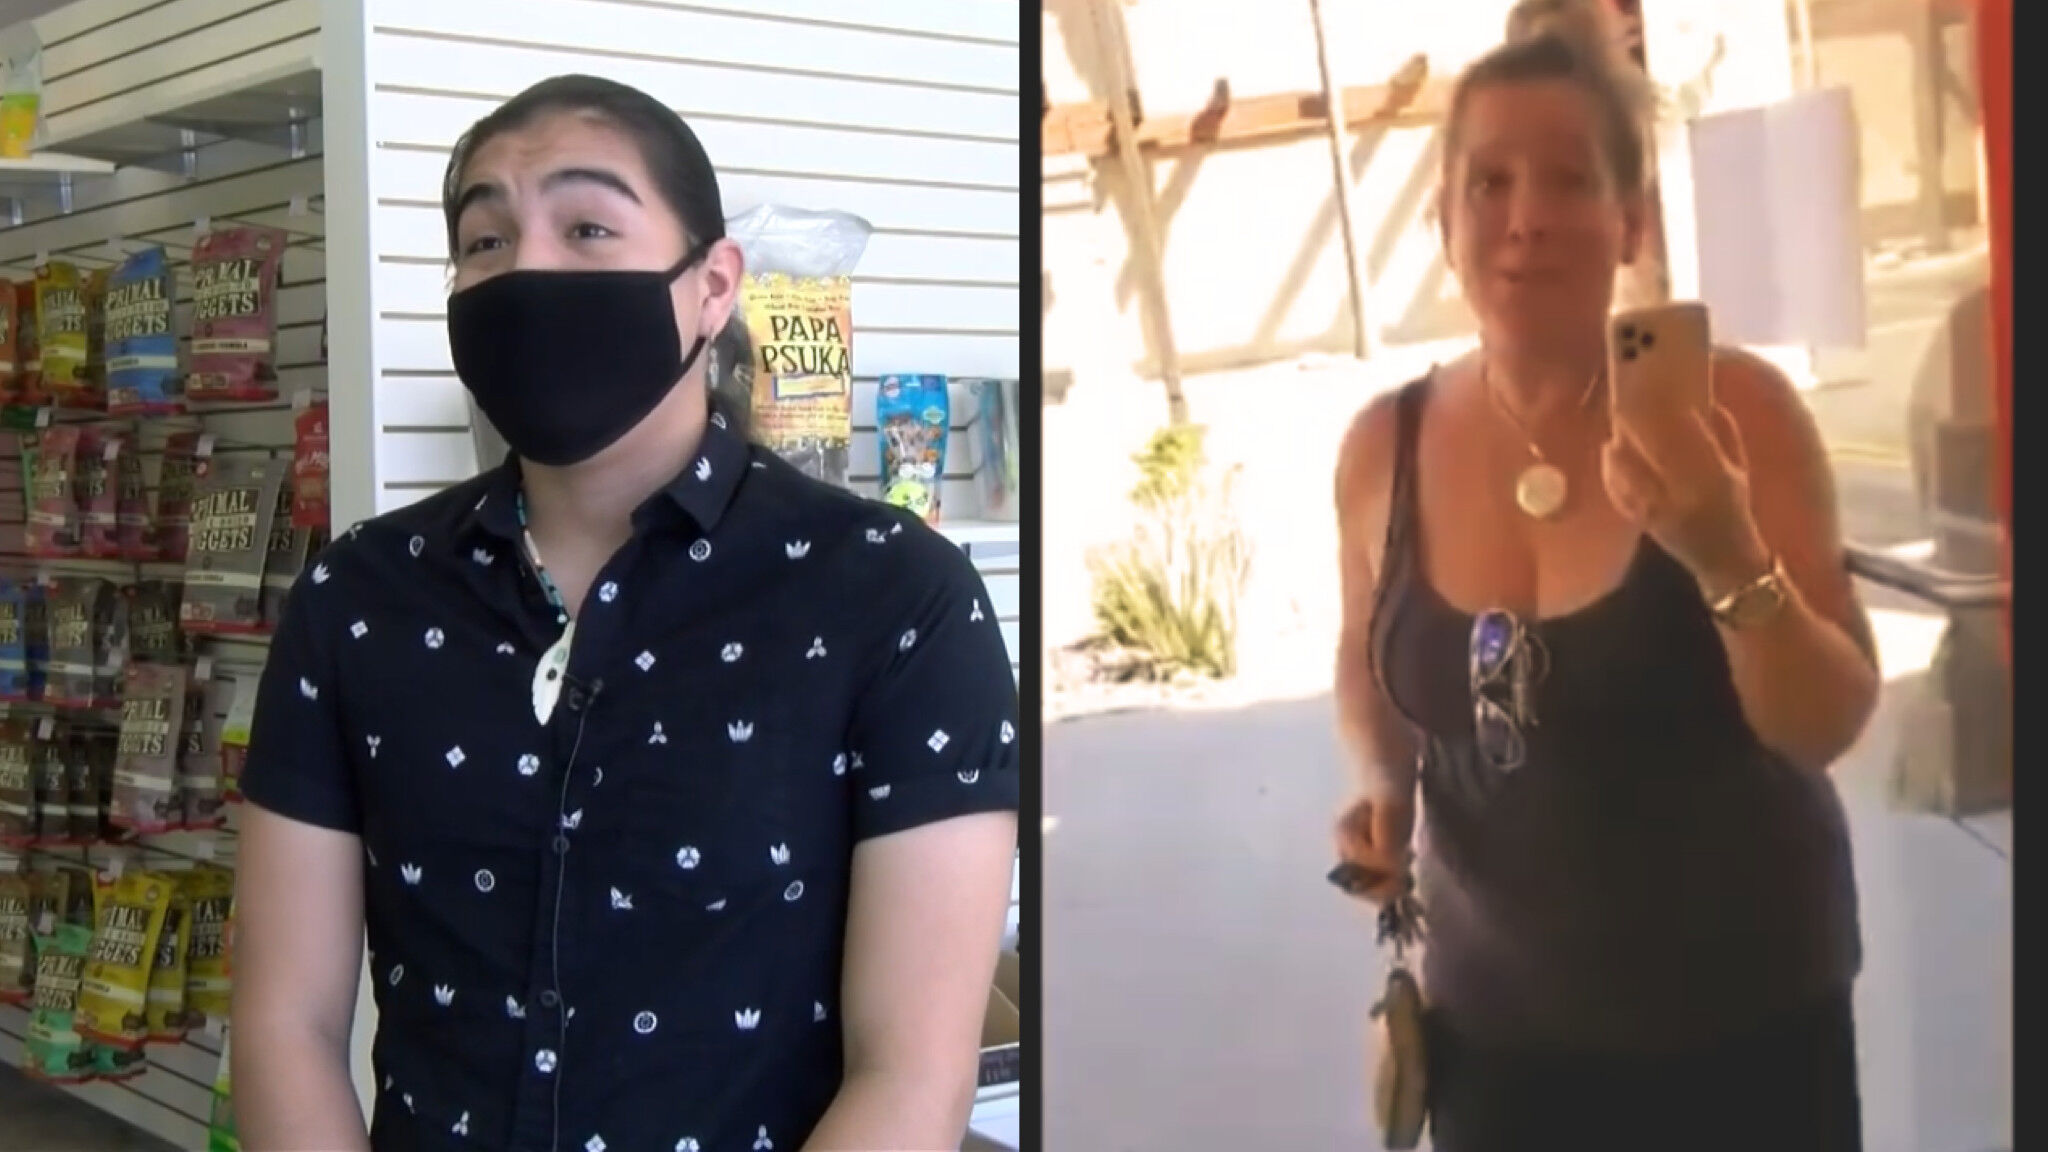 Aidan Bearpaw (left) filmed his viral confrontation with the "Pet Store Karen" (right).